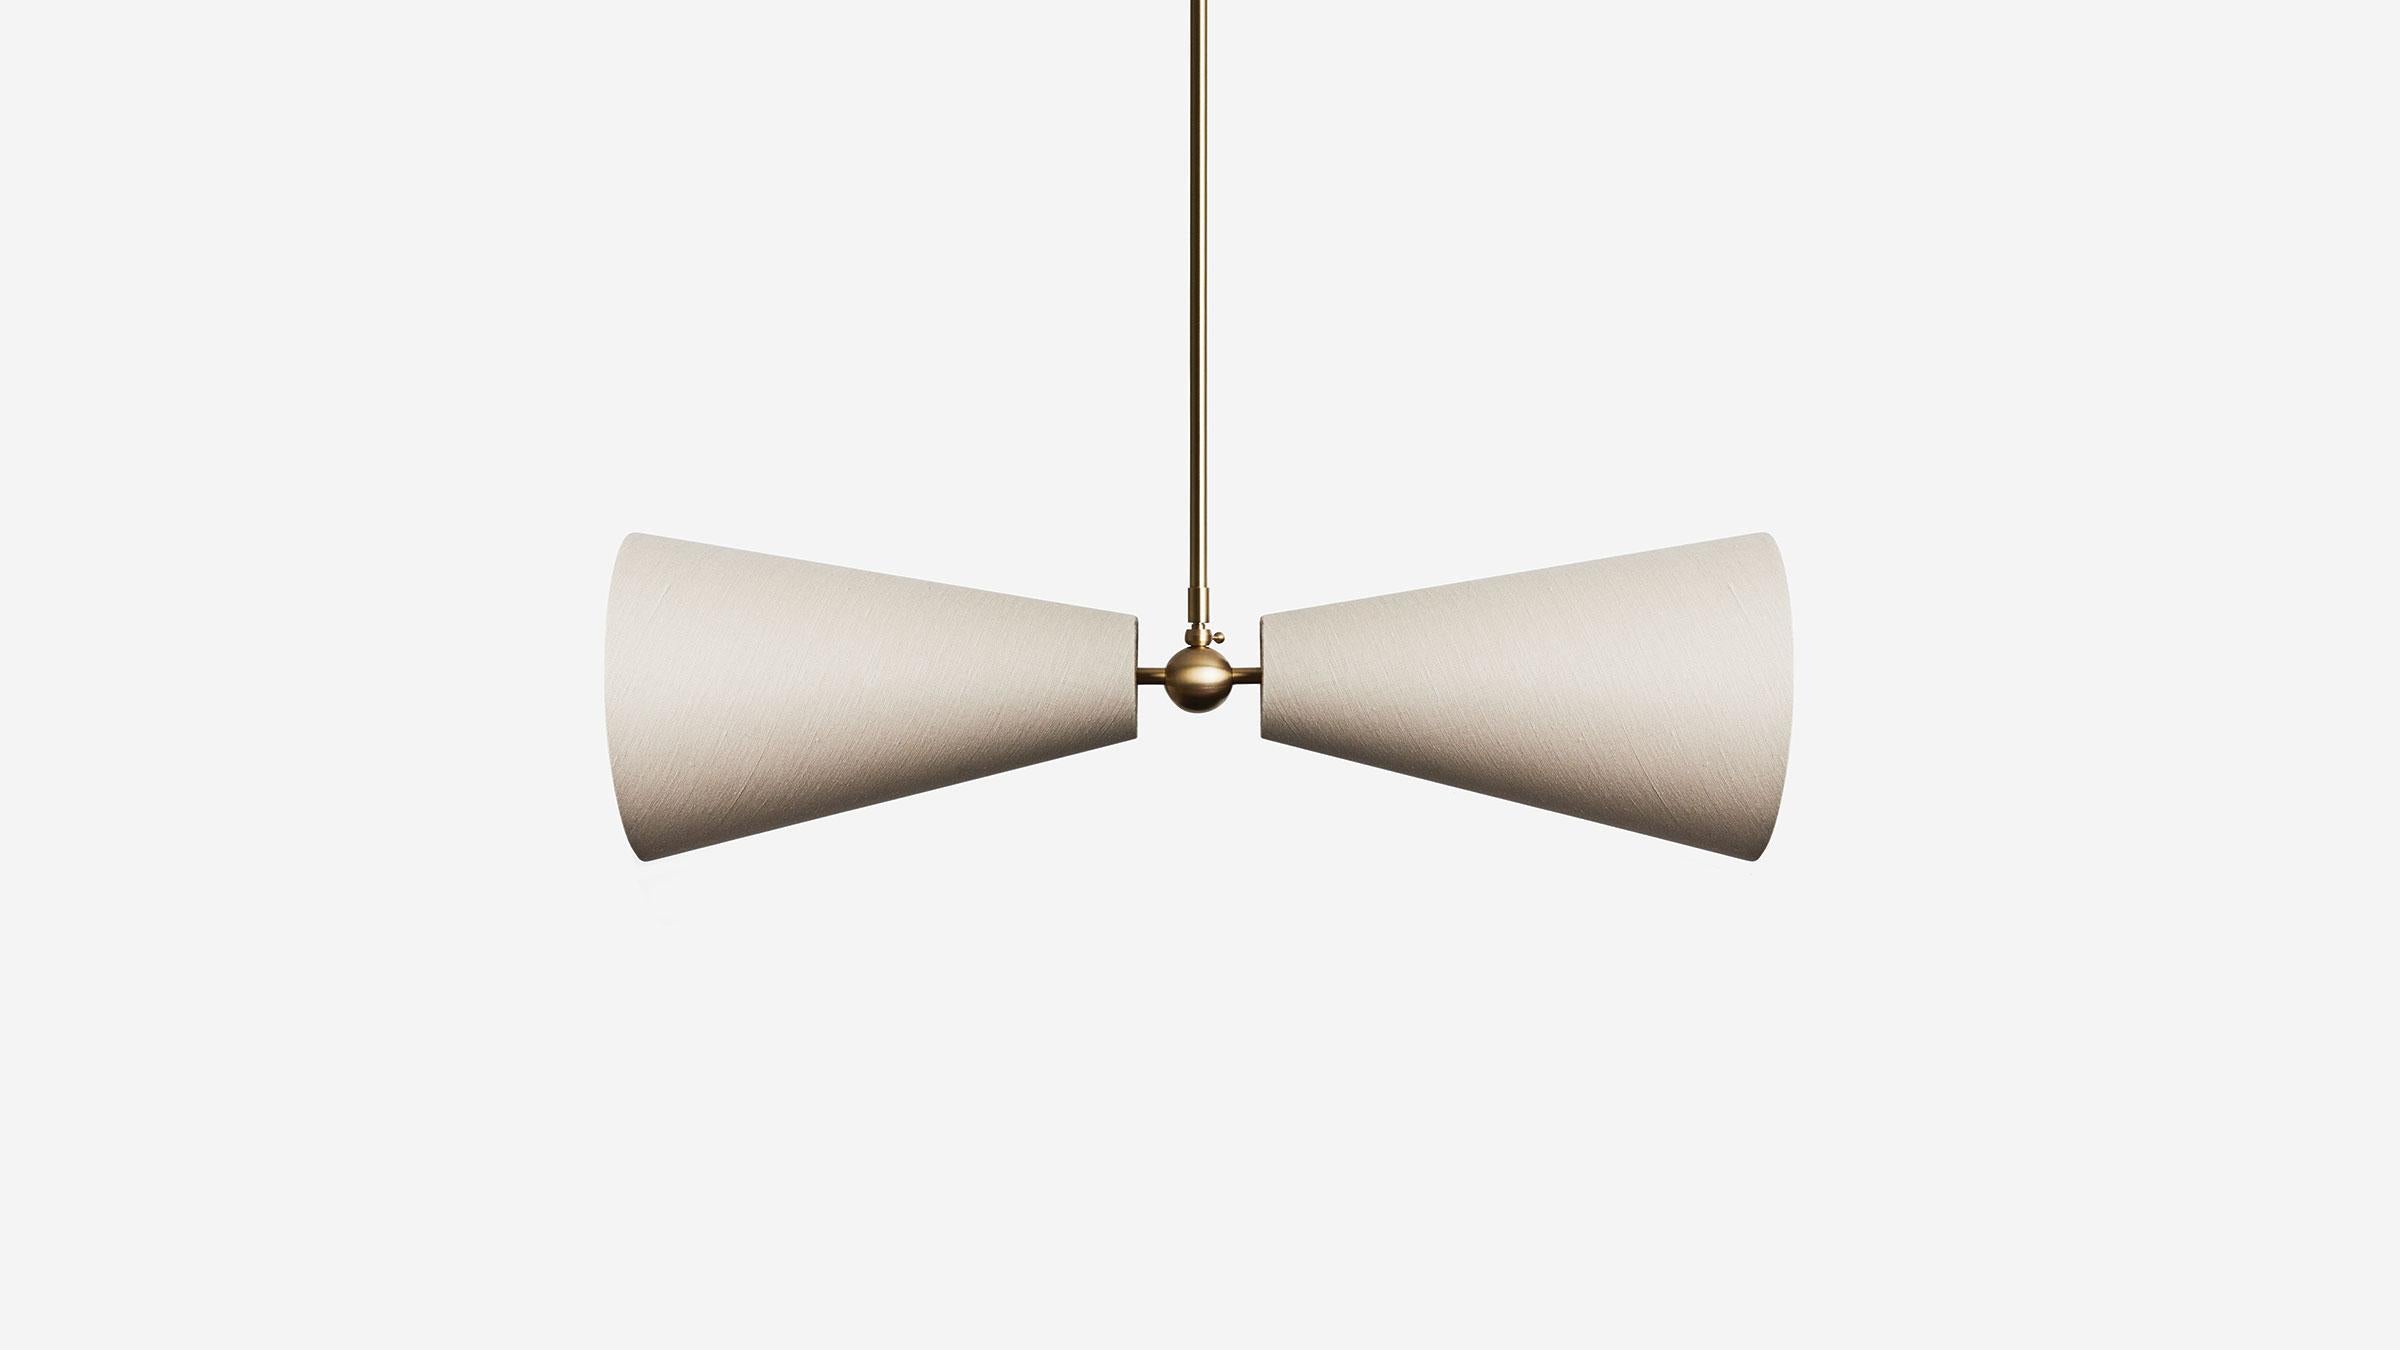 Pendolo Pendant II explores two opposing cone forms, and the latent tension between gravity and levity within their arrangement. Configured as a horizontal or near-vertical fixture, this pendant variation can occupy both a wide or narrow footprint.